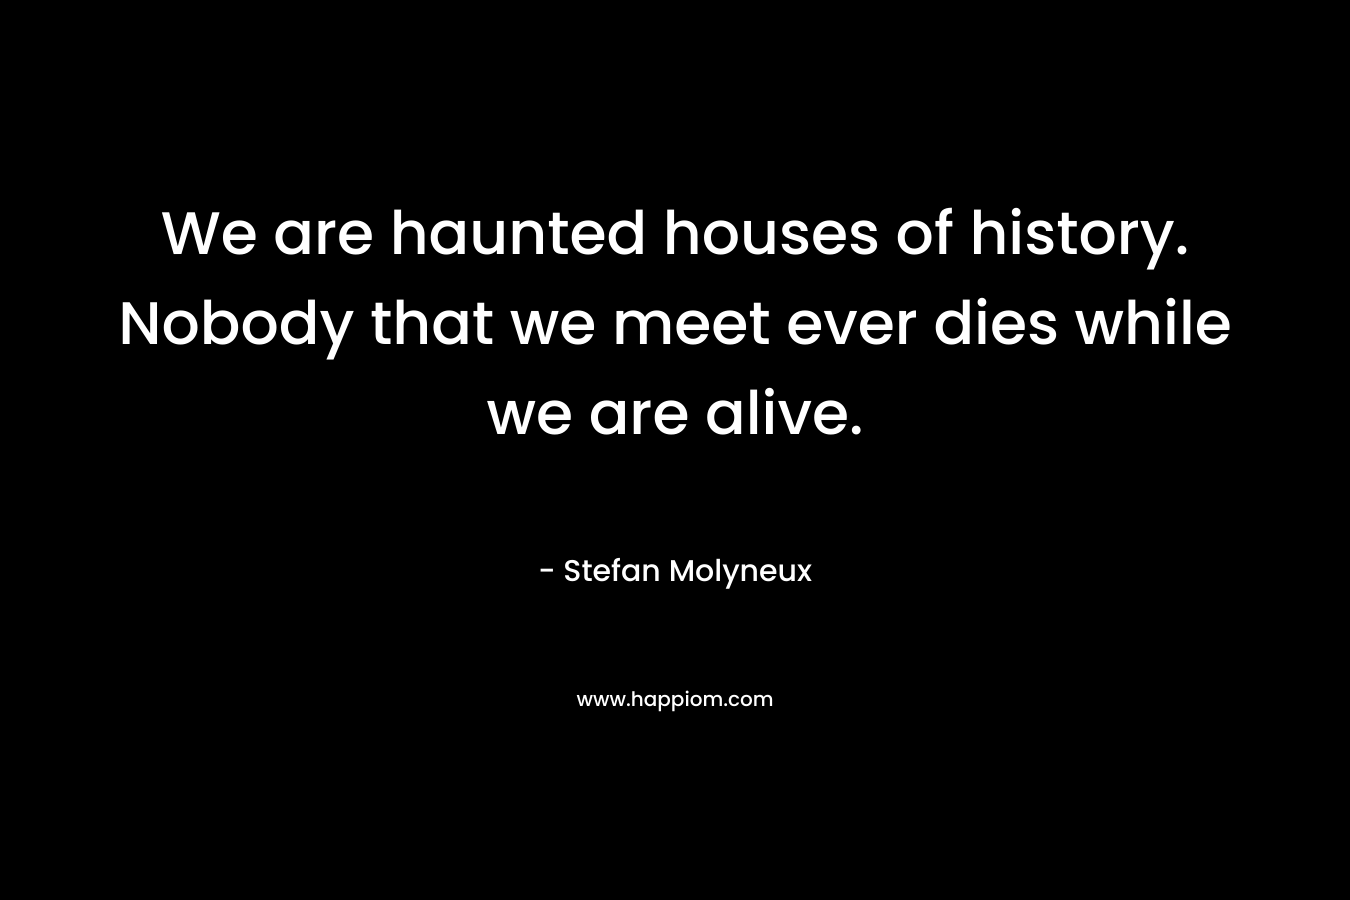 We are haunted houses of history. Nobody that we meet ever dies while we are alive.